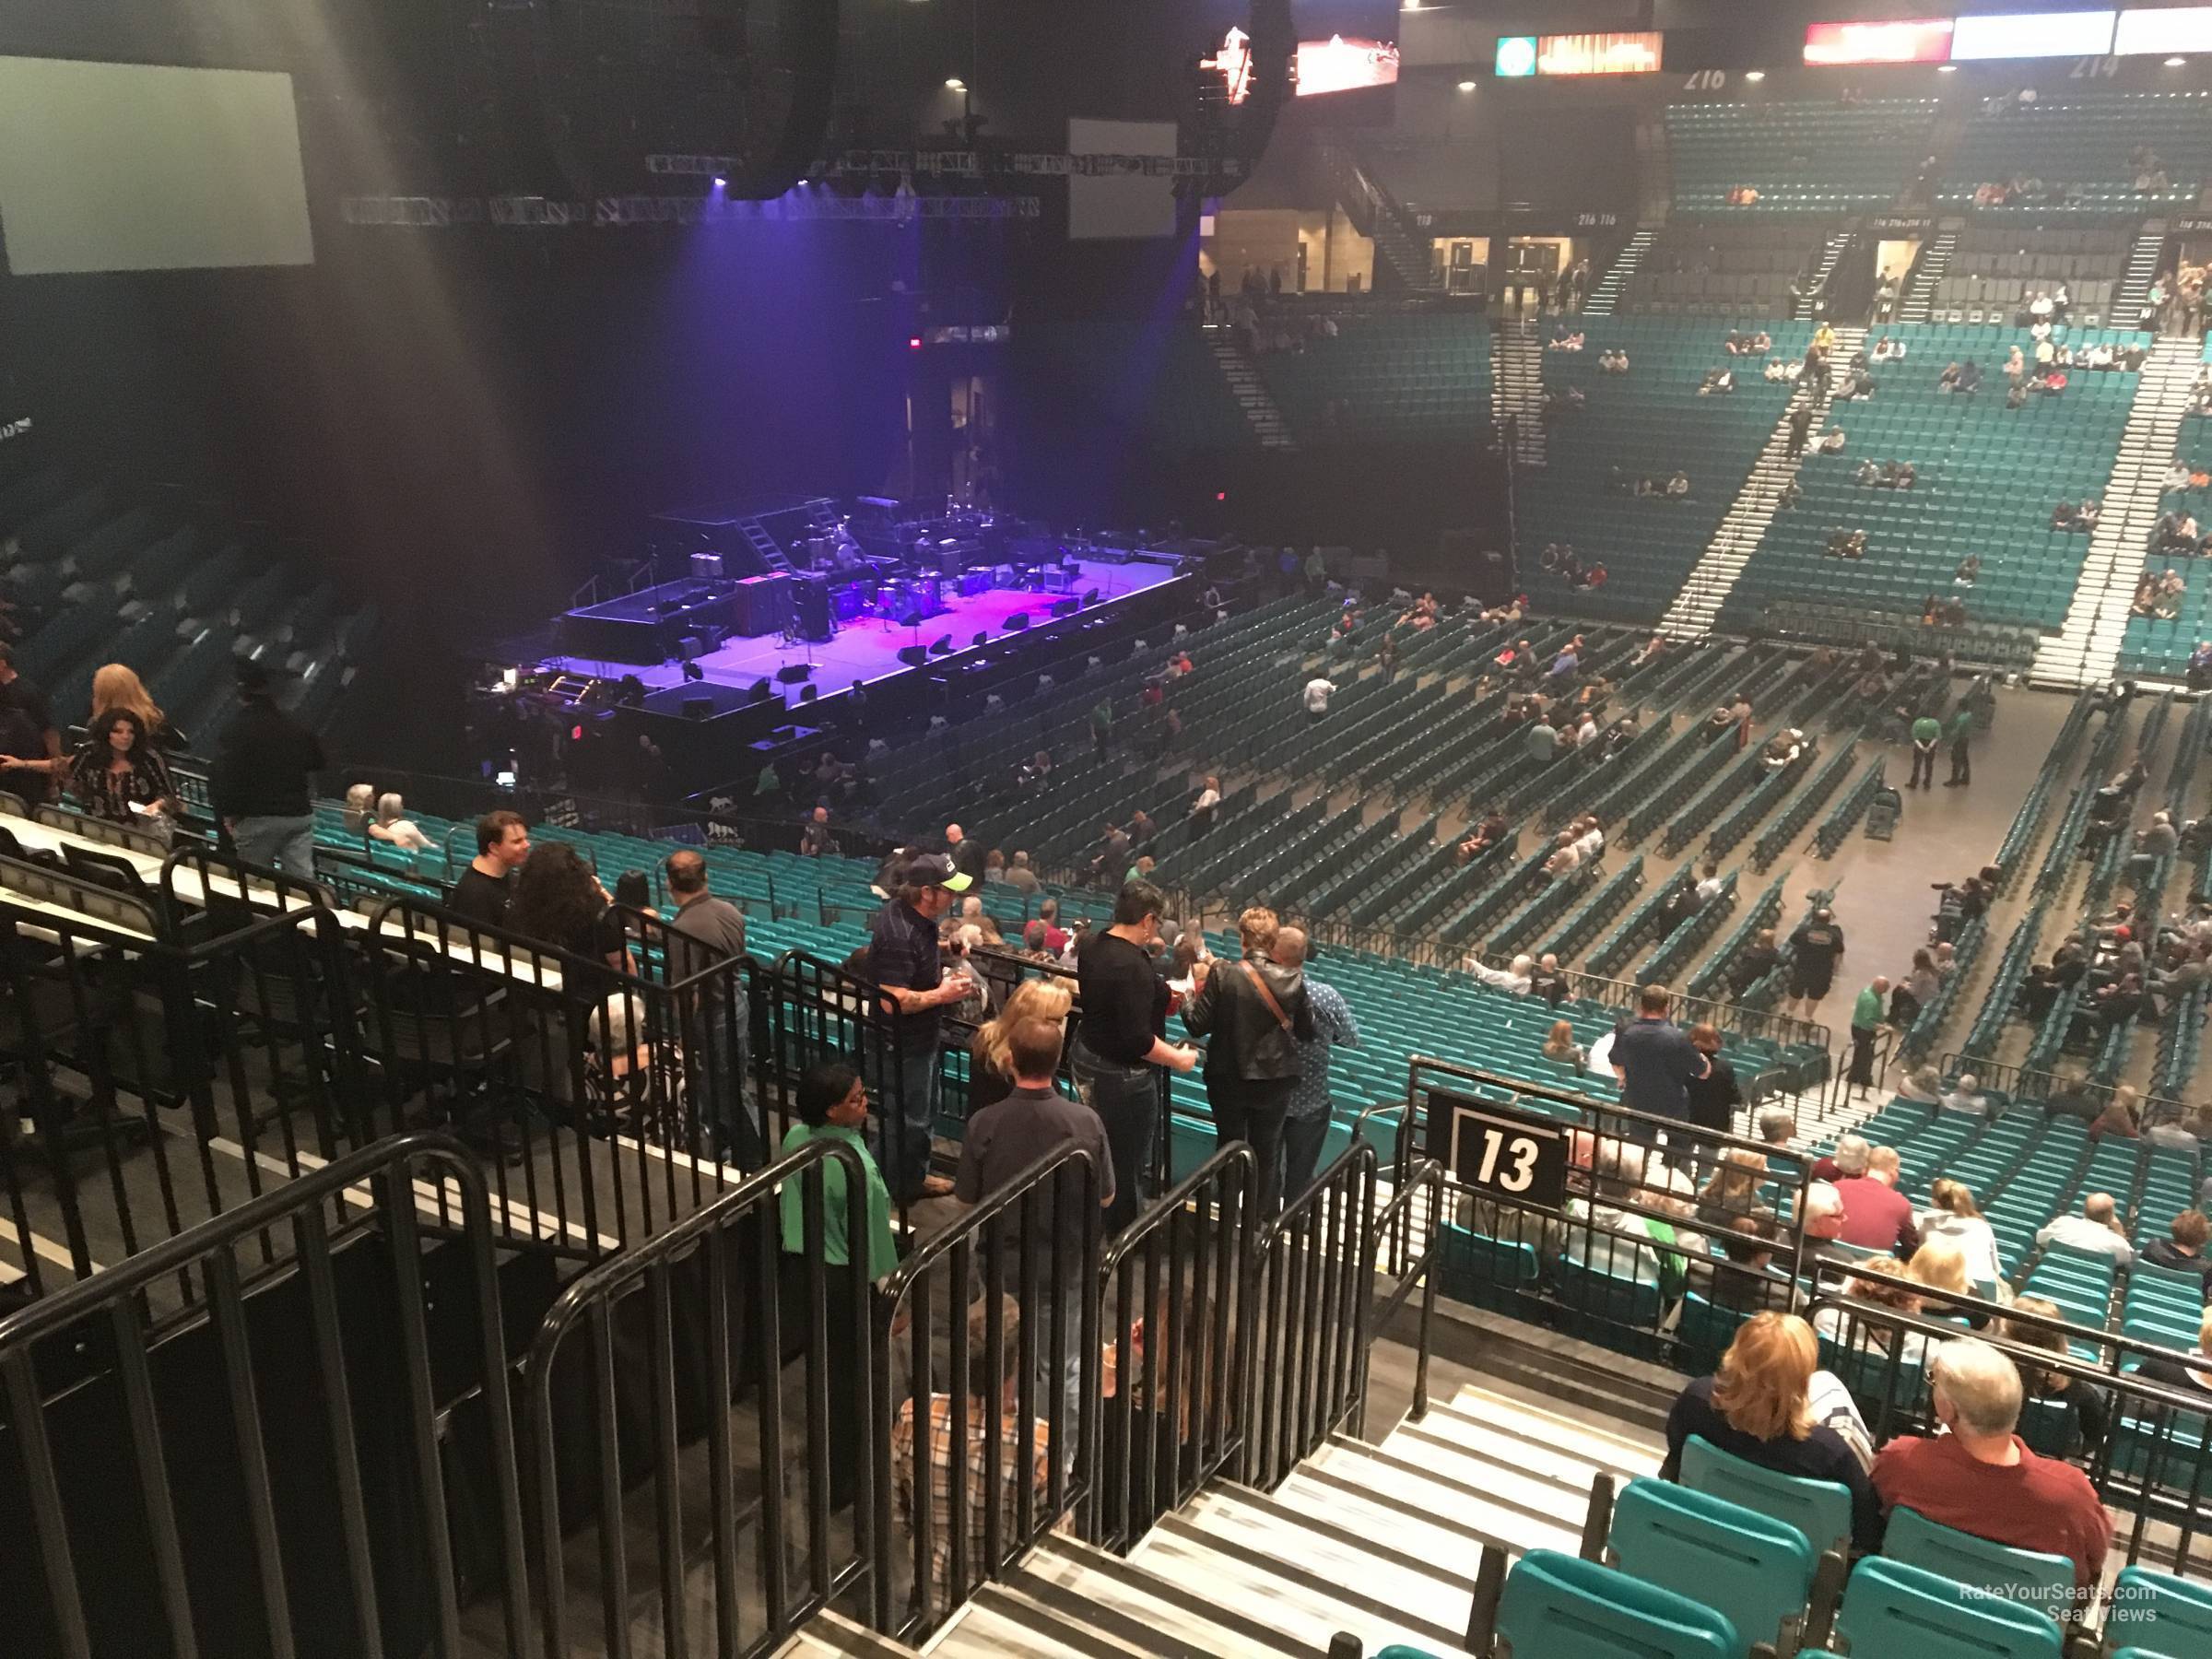 Section 113 at MGM Grand Garden Arena